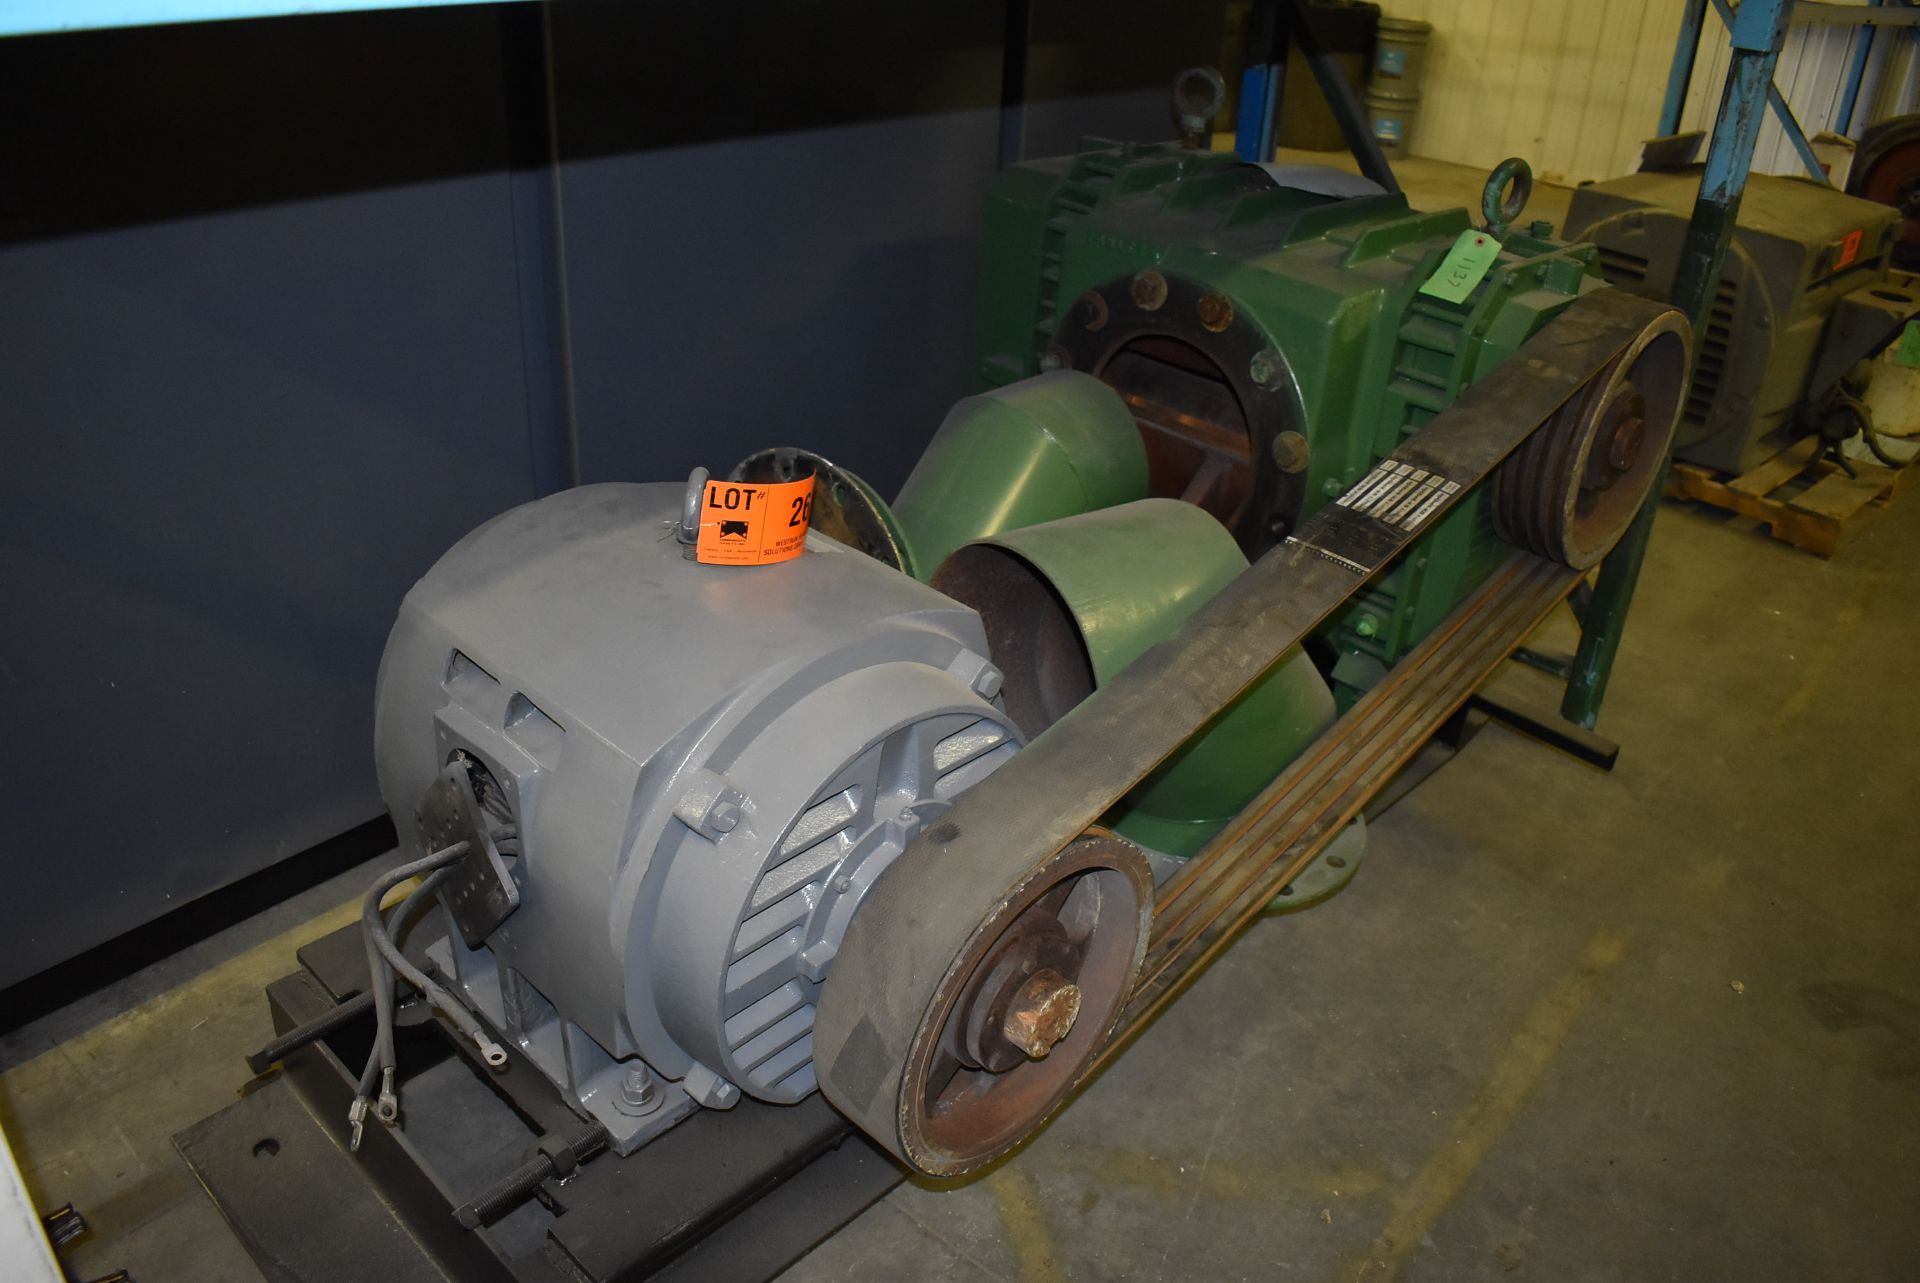 ROOTS 821-RCS-JV ROTARY LOBE BLOWER WITH 100 HP ELECTRIC MOTOR, 1765 RPM, 460V, 60 HZ, S/N: - Image 3 of 5